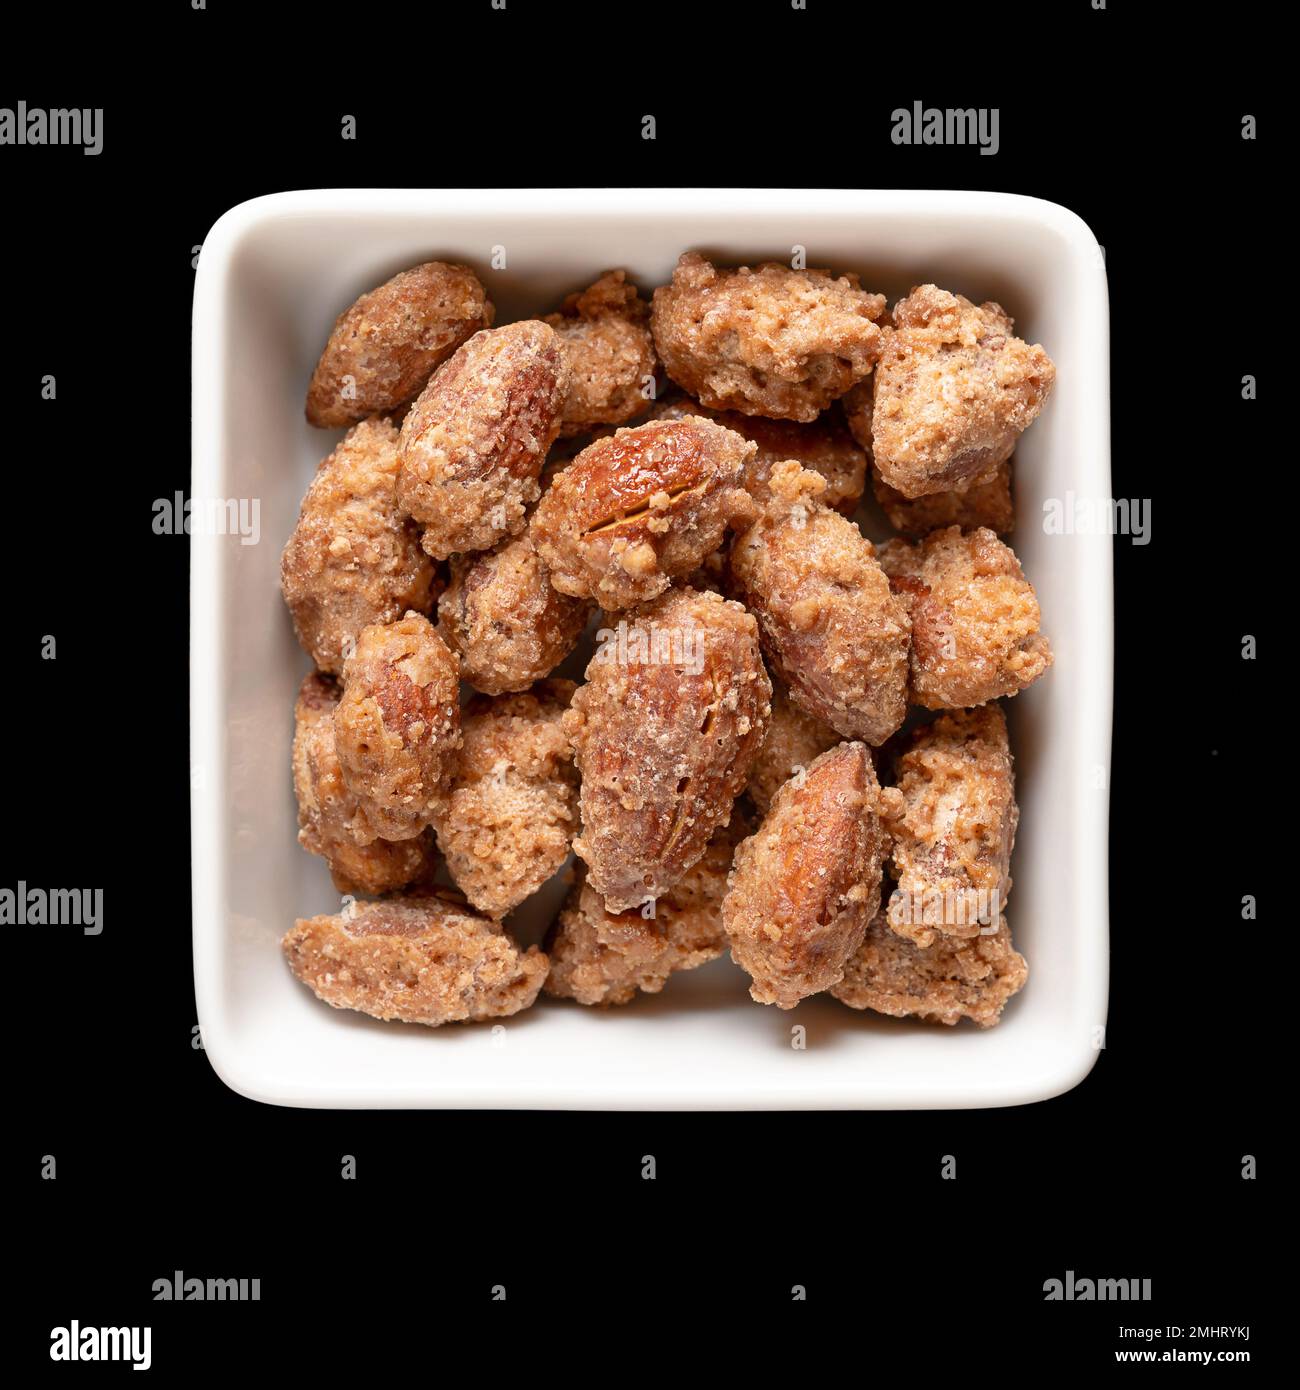 Candied almonds in a white square bowl. Homemade, in a special way cooked almonds, whole nuts coated in crunchy sugar. Sold at Christmas markets. Stock Photo